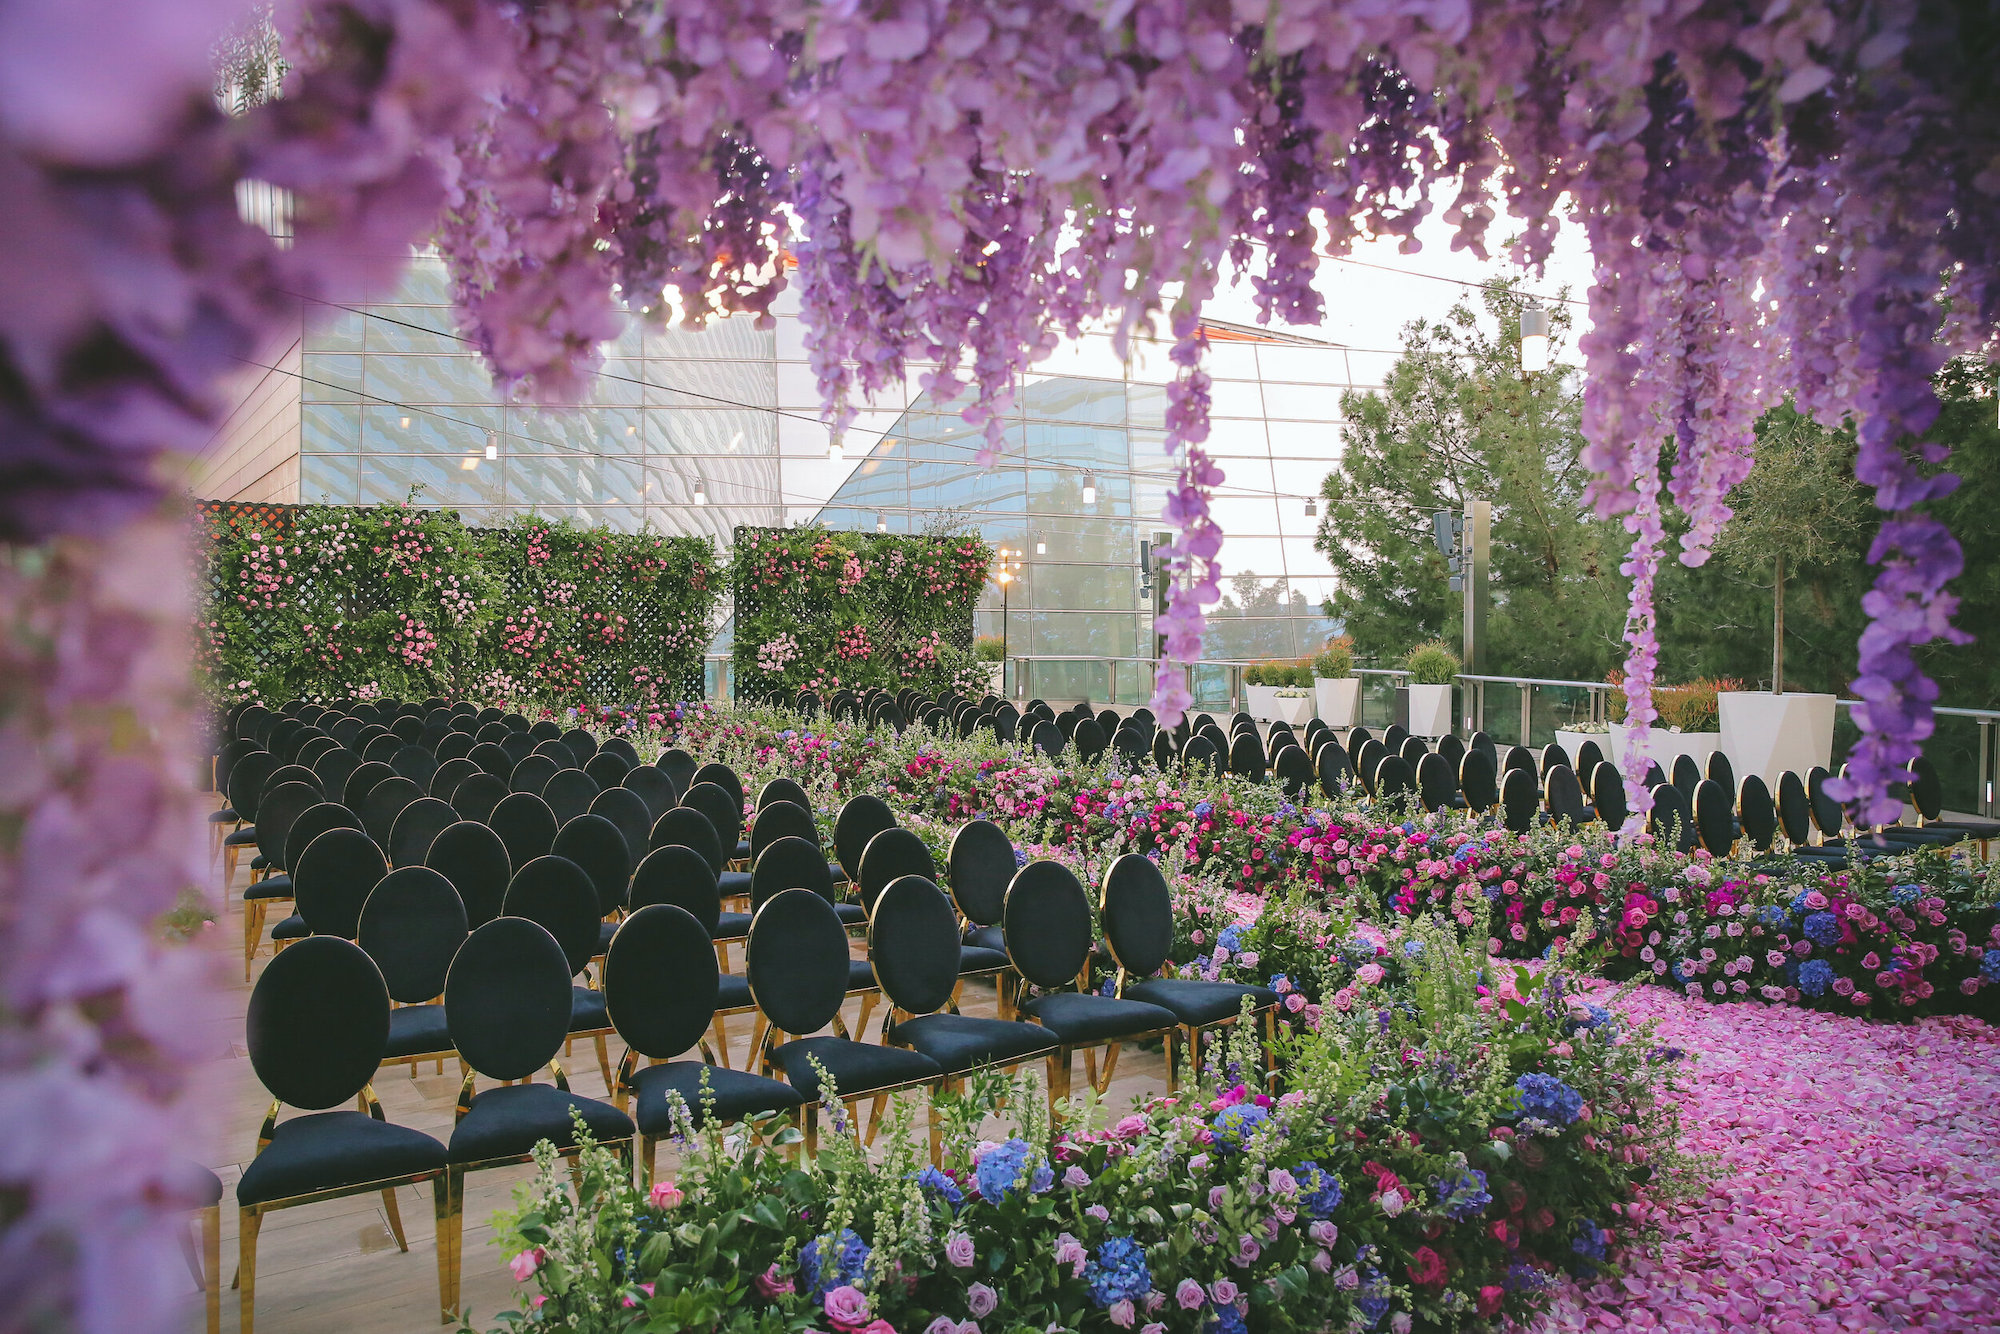 A wedding ceremony with rows of black chairs and flowers down the aisle